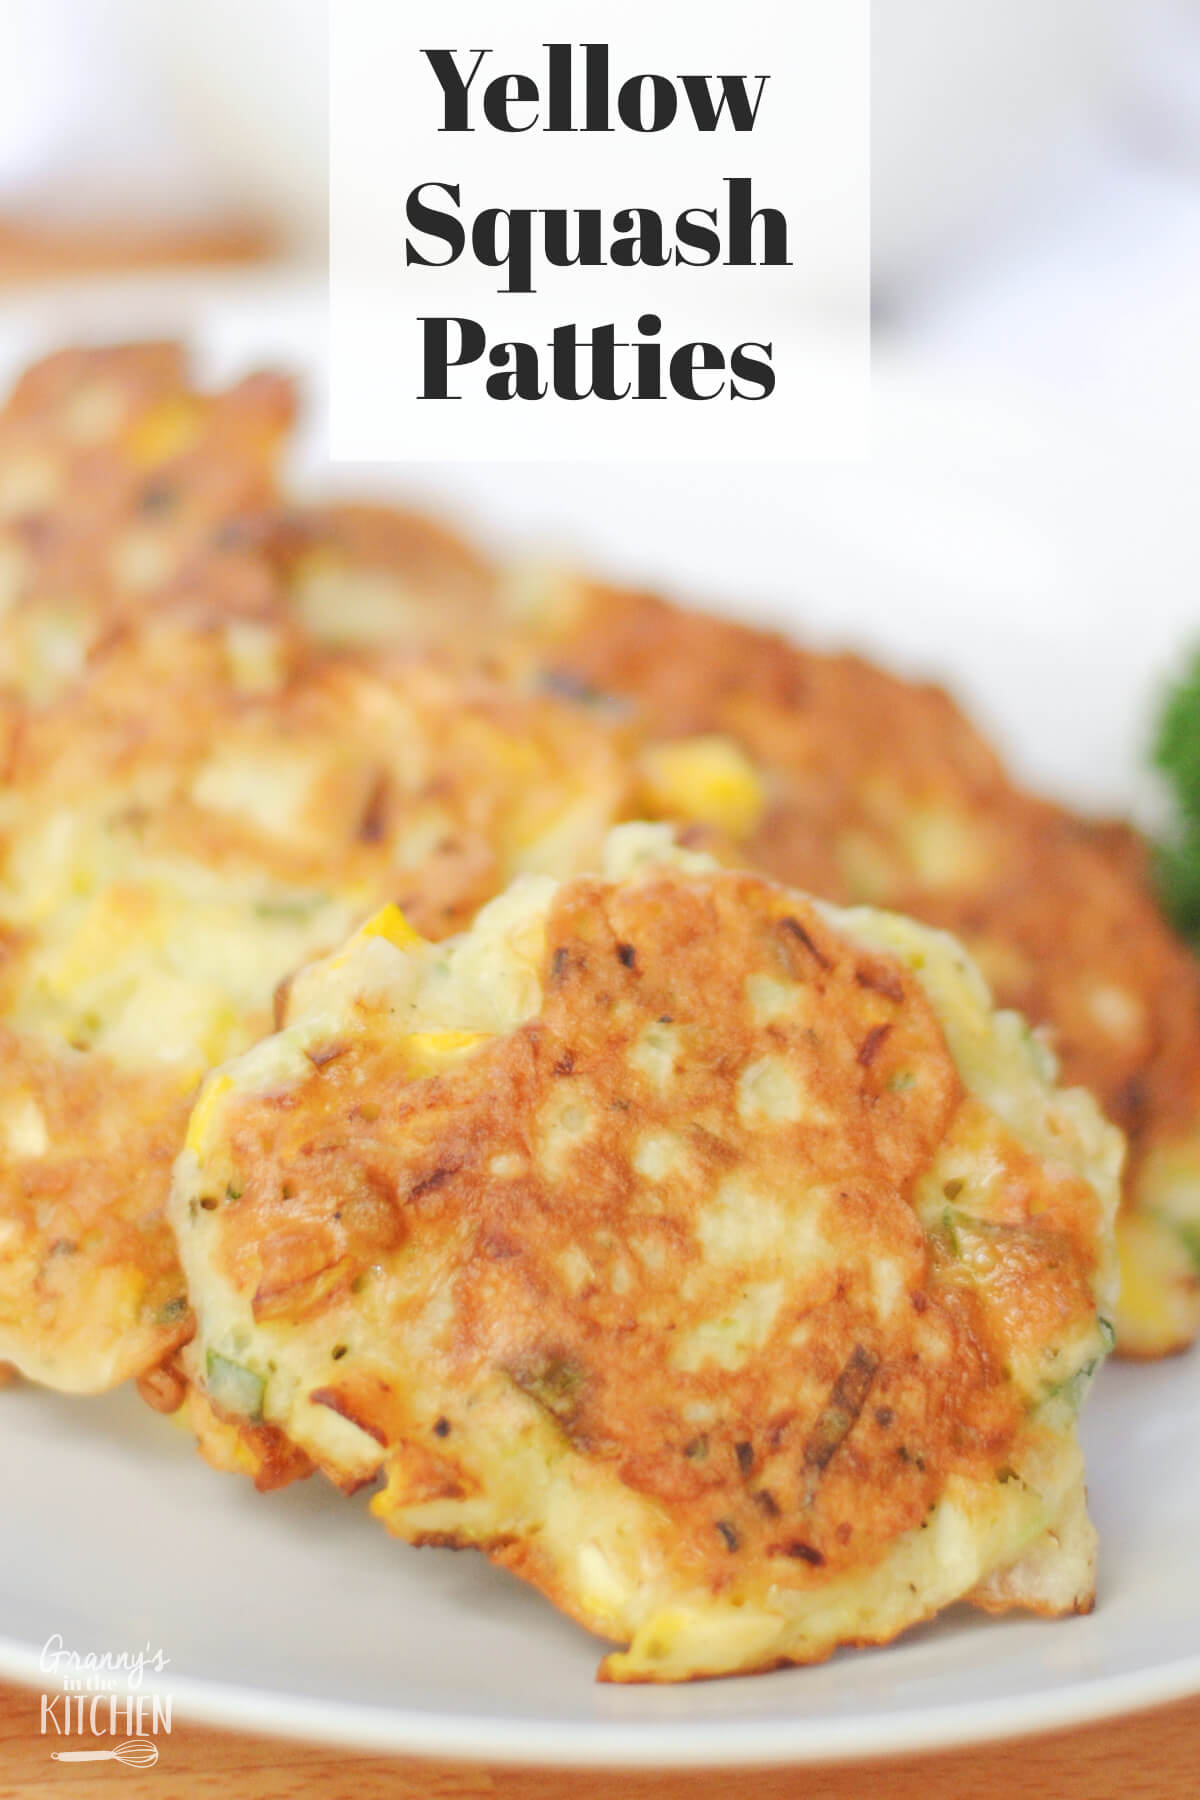 close up of a plate of squash fritters; text overlay "Yellow Squash Patties"